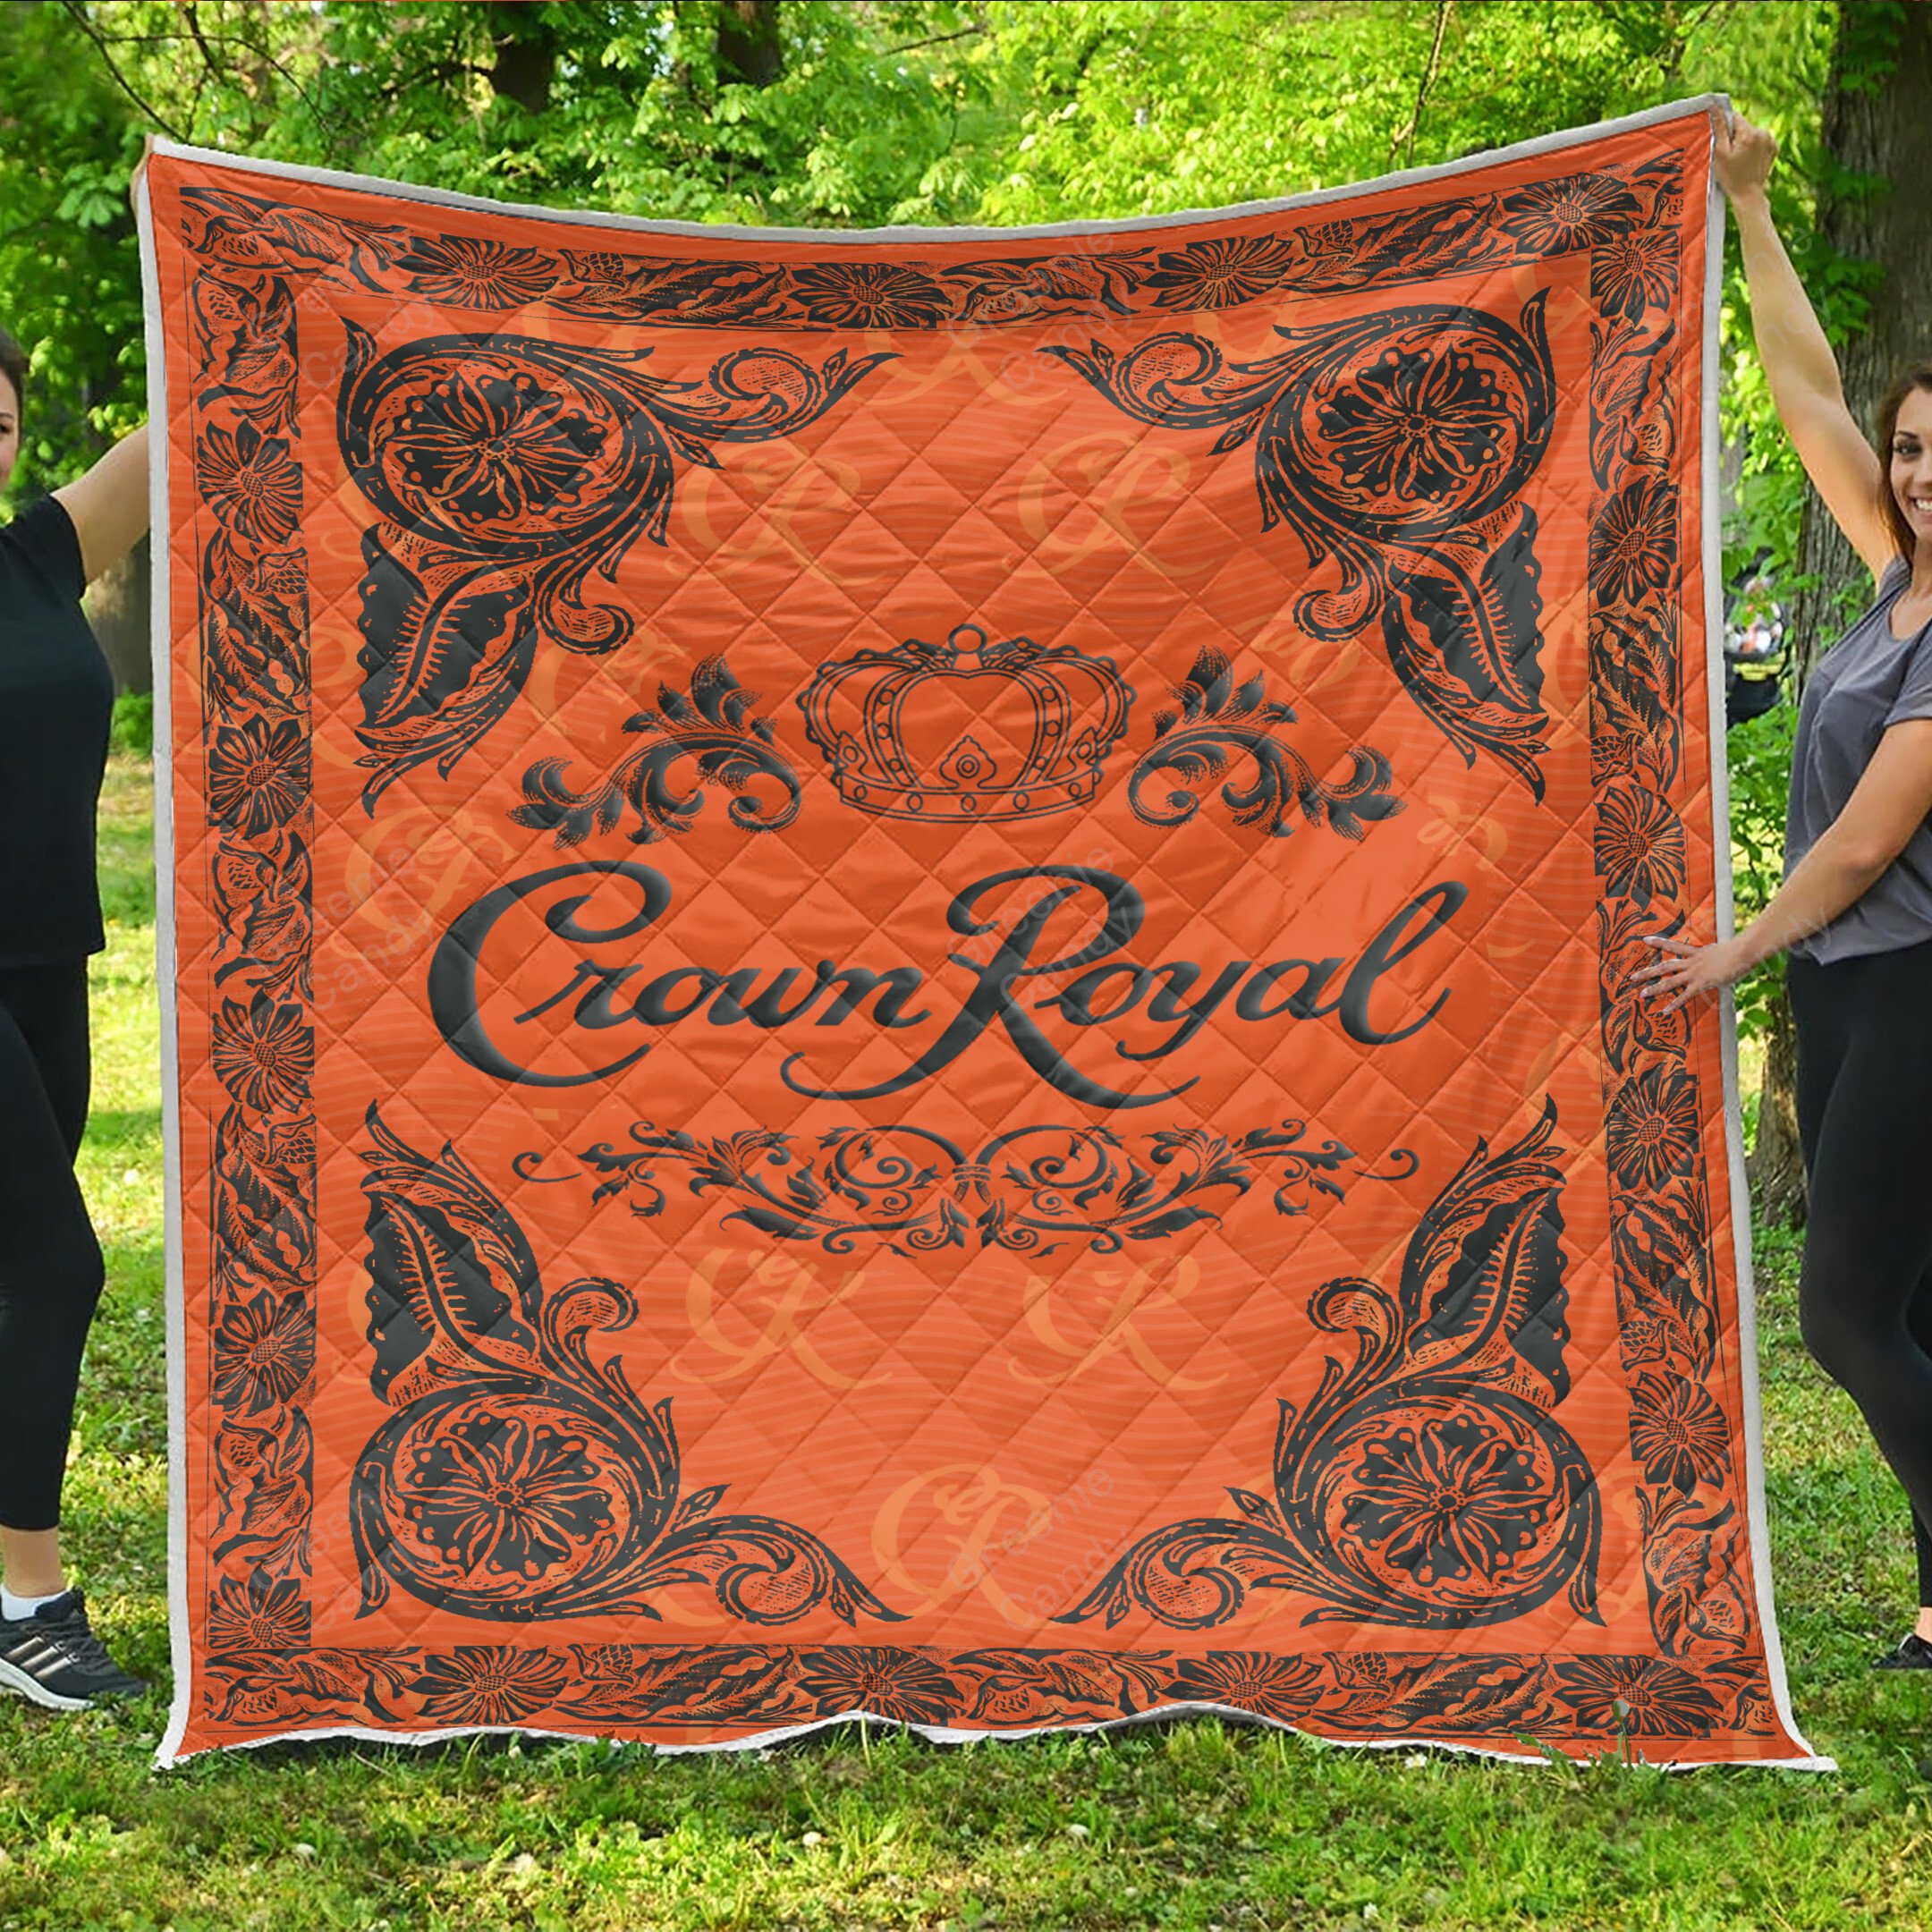 Crown Royal Peach Whisky blanket quilt